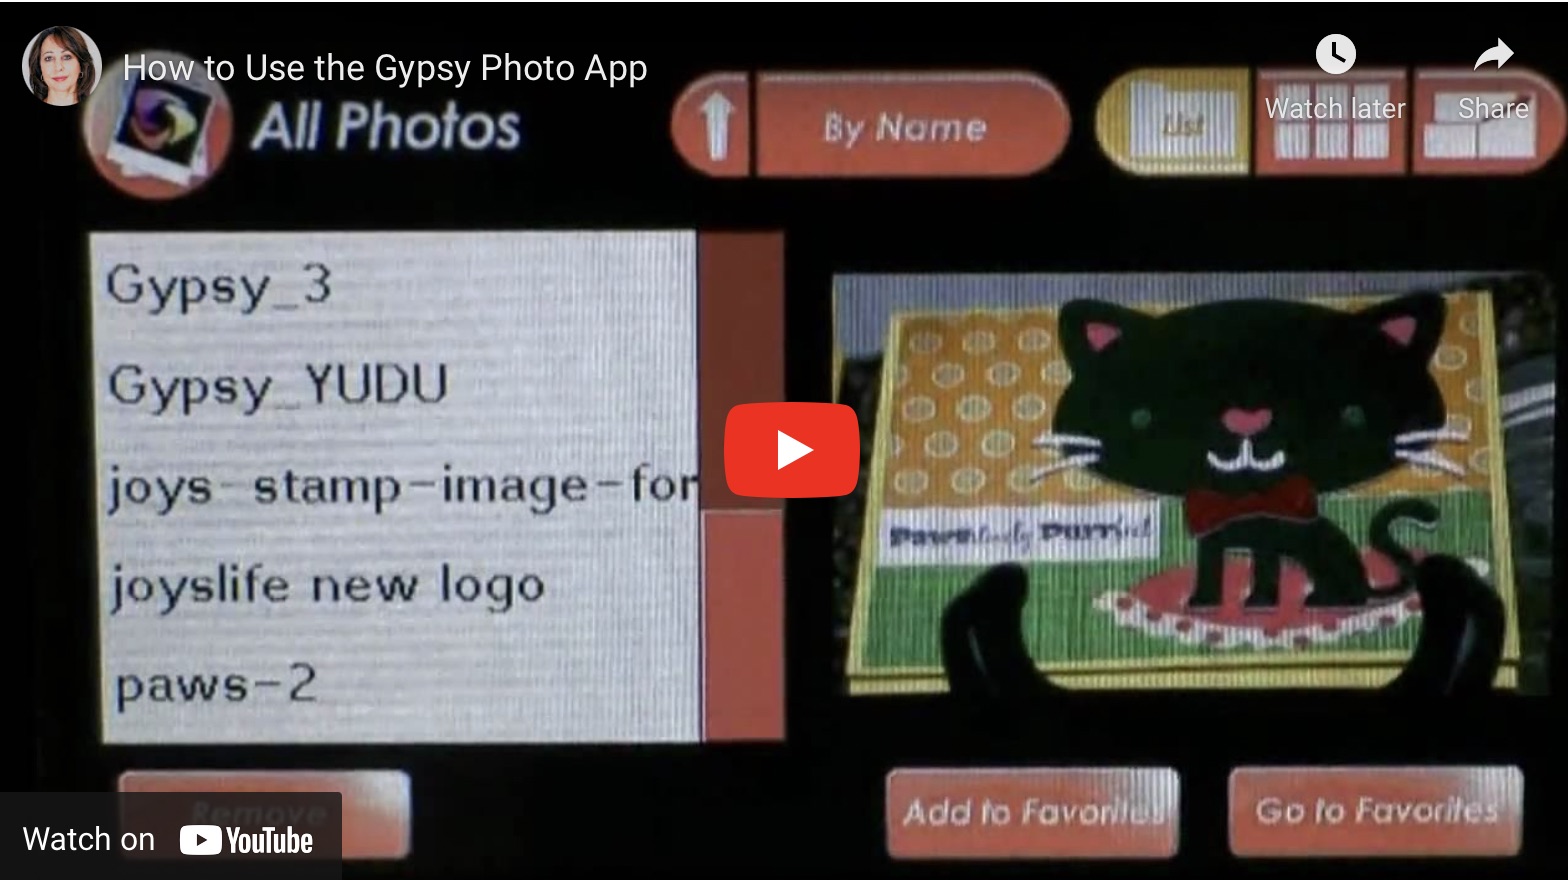 How to Use the Gypsy Photo App – Video